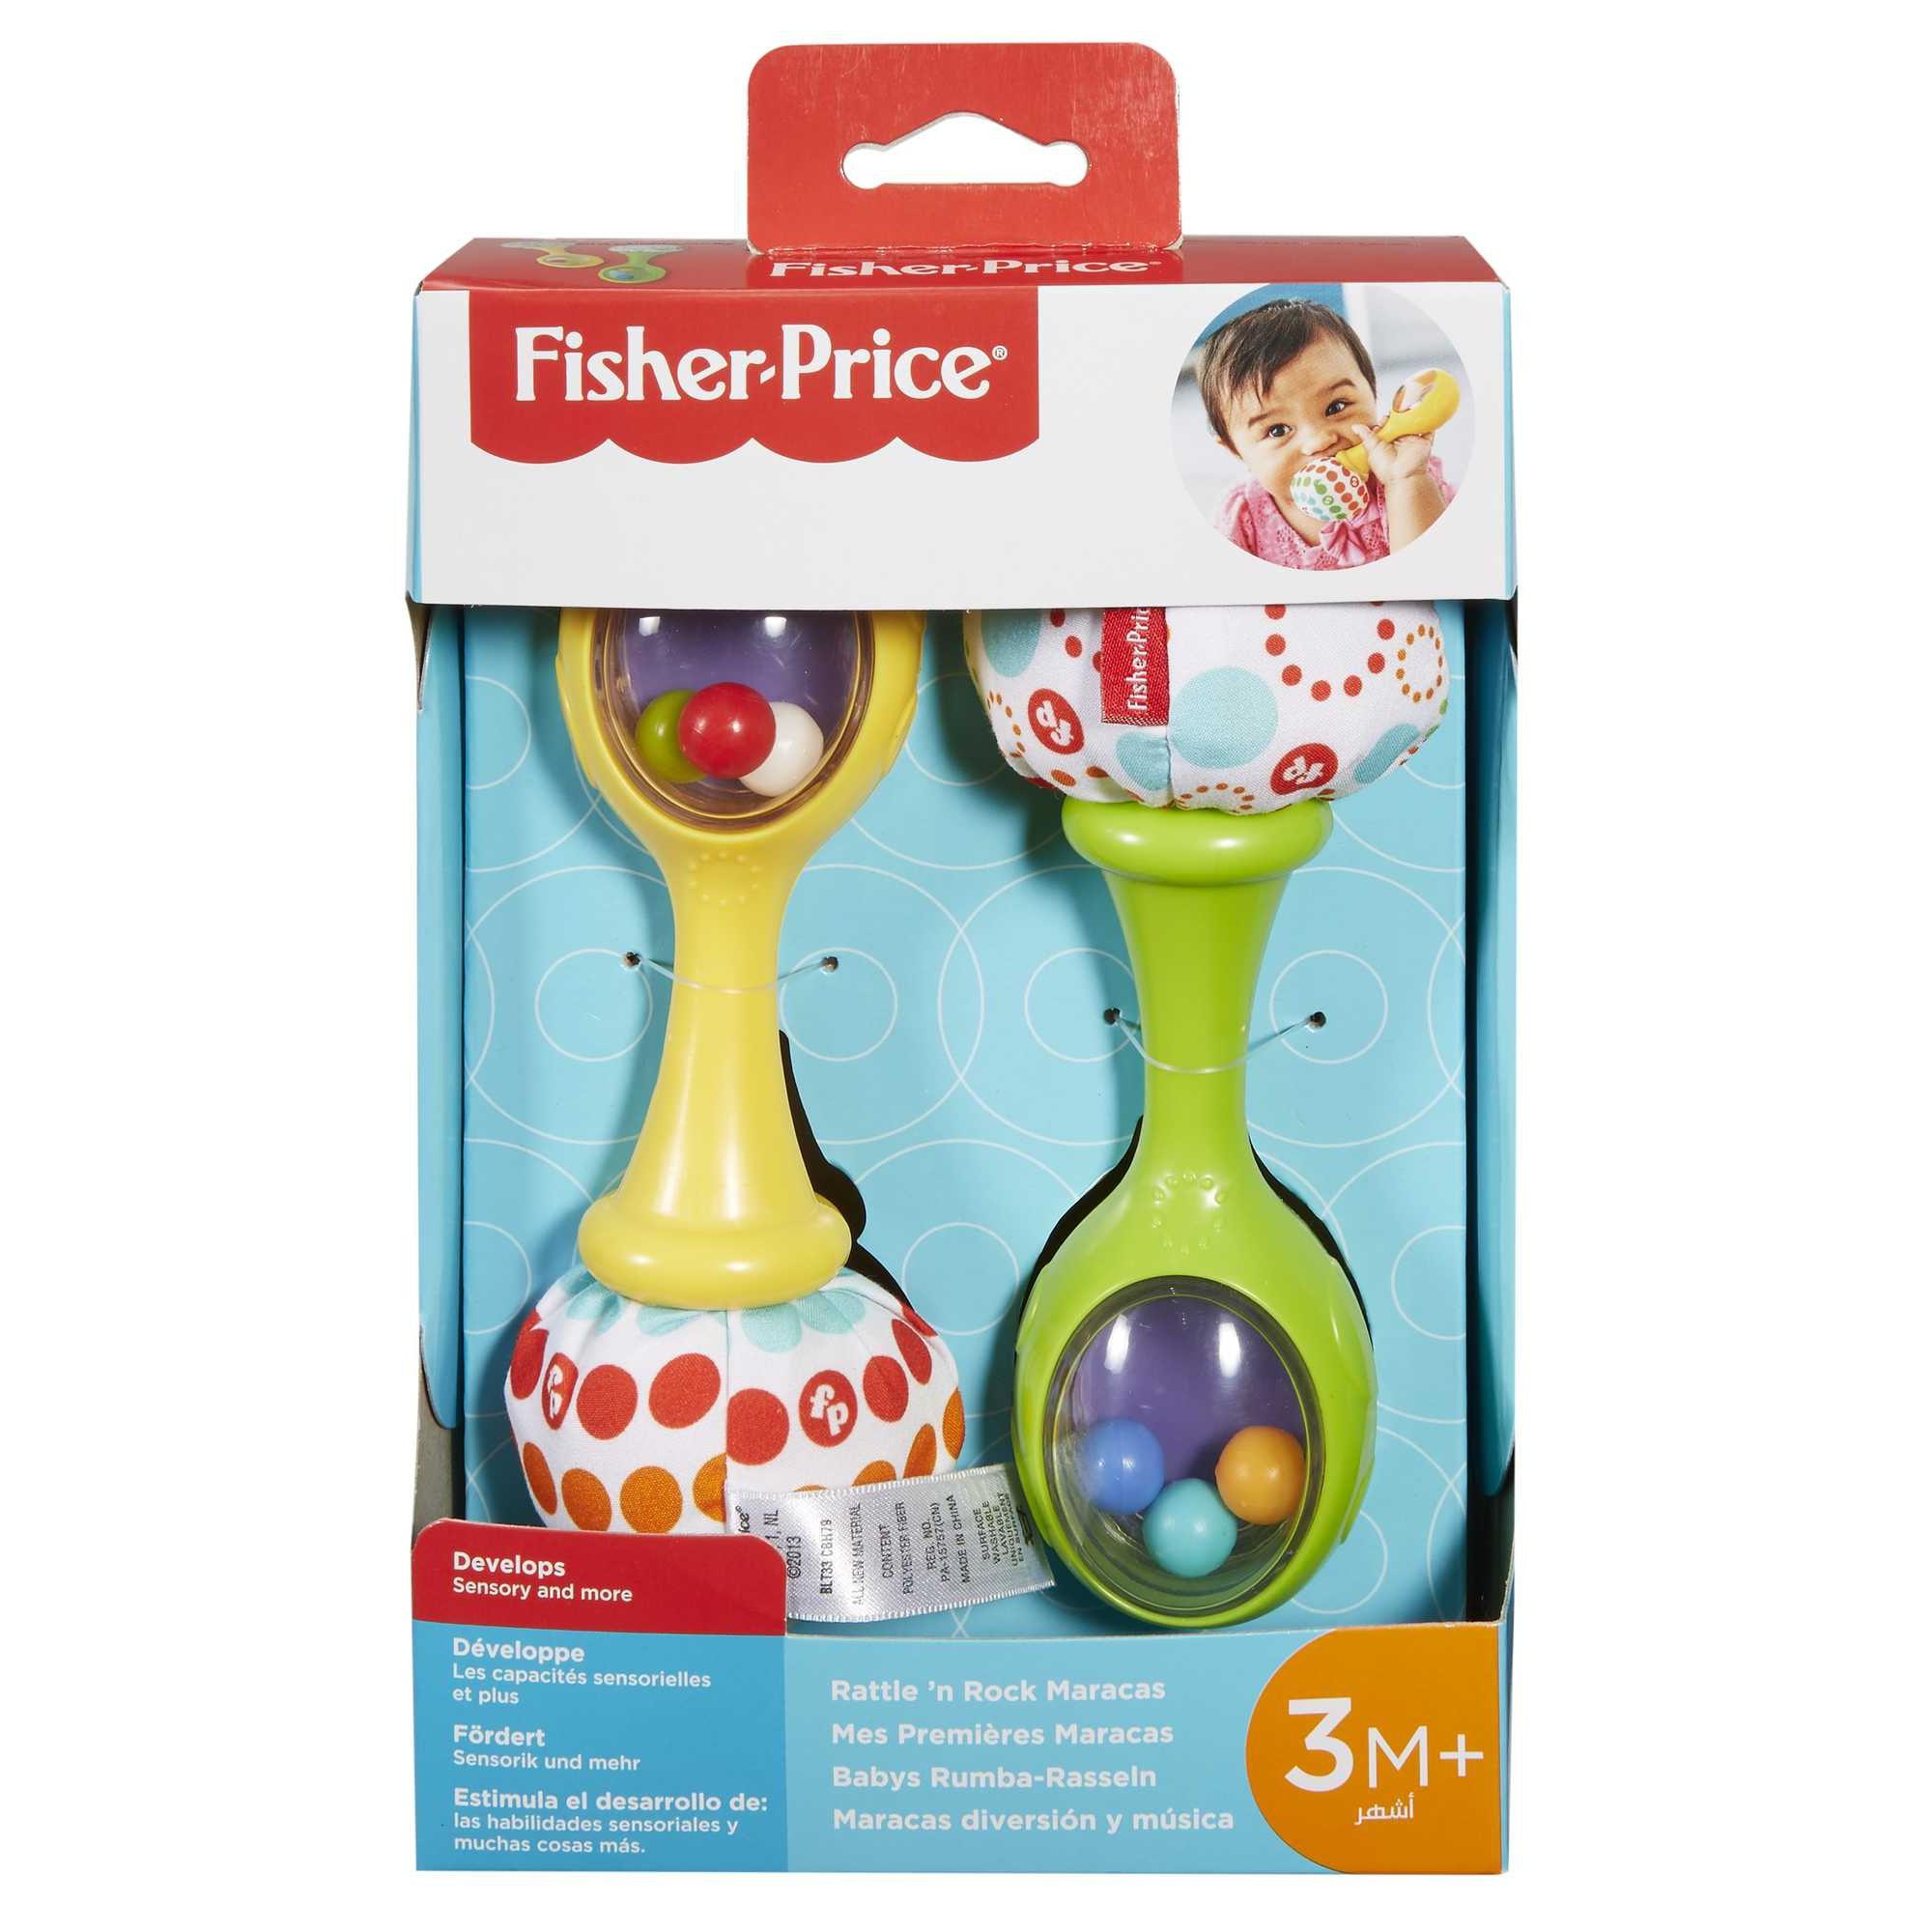 Fisher Price-Fisher-Price Rattle 'n Rock Maracas-BLT33-Legacy Toys